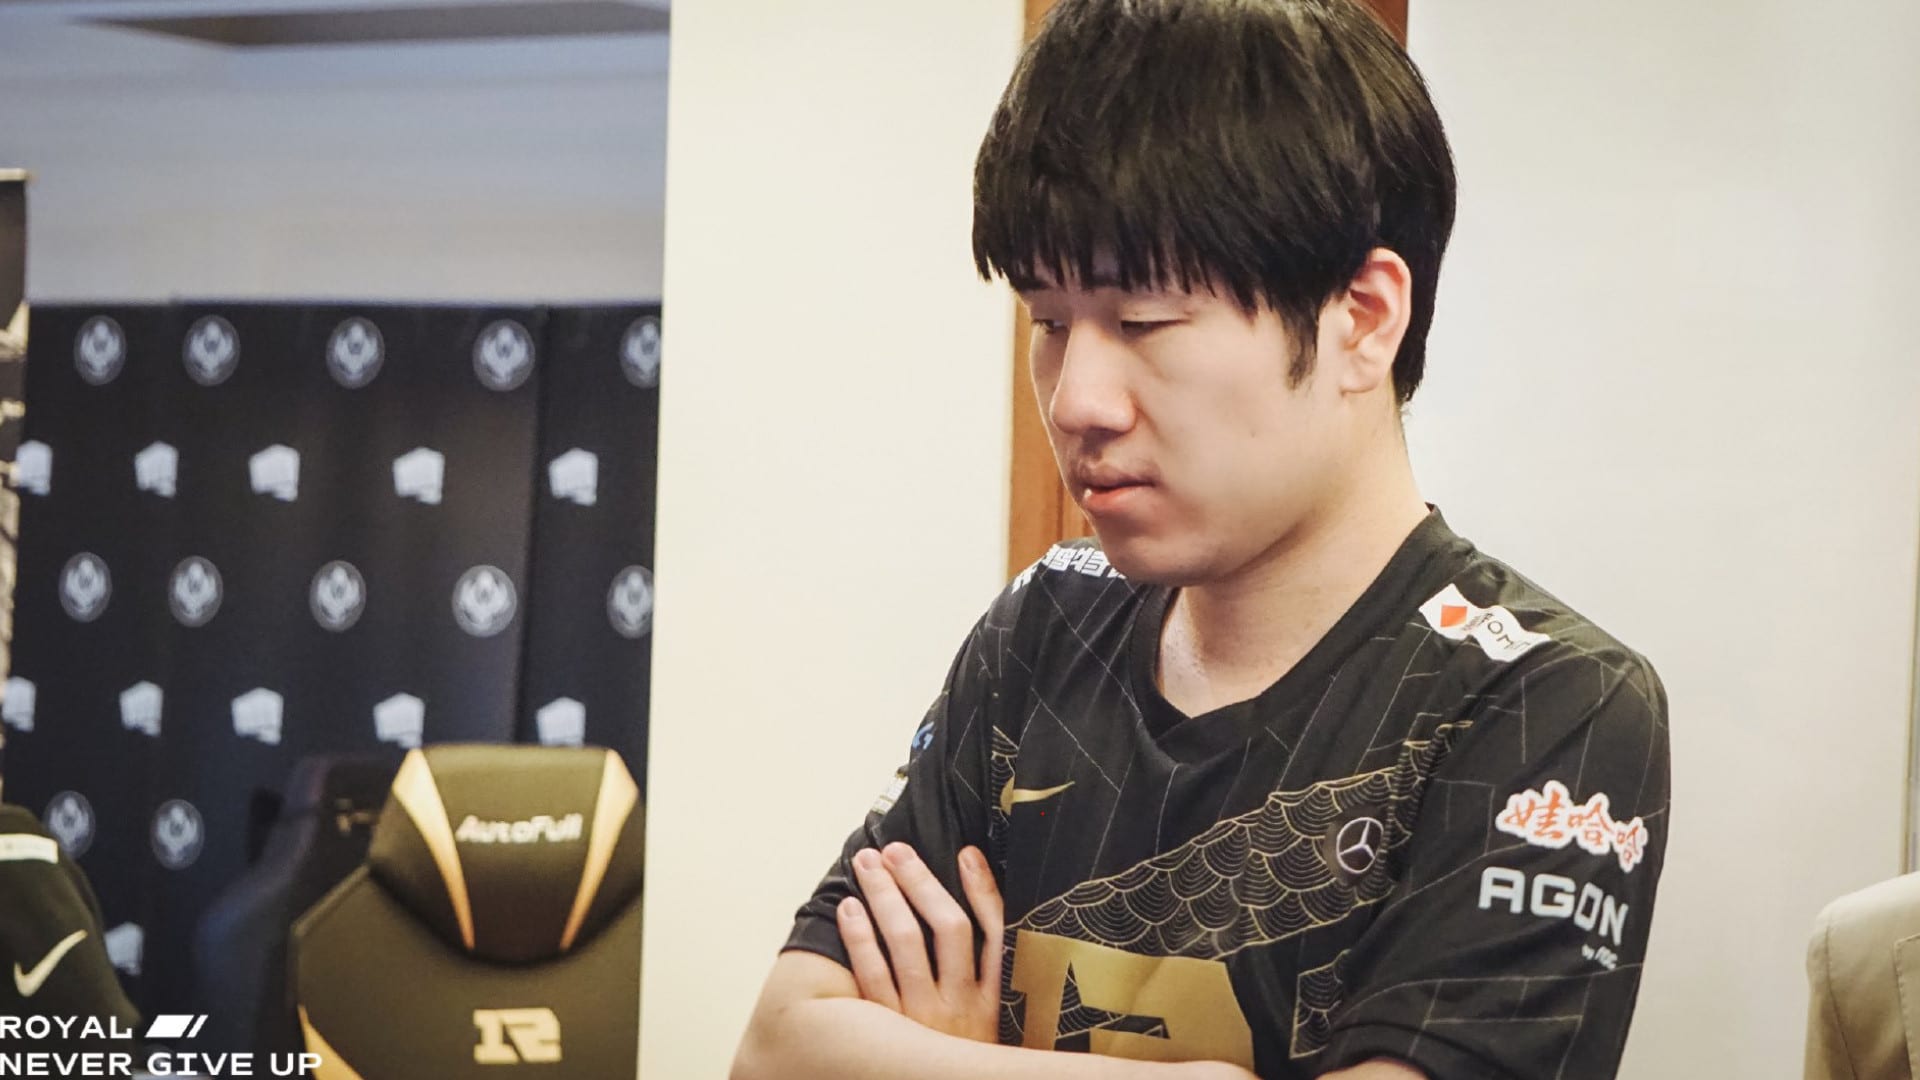 LoL: MSI tournament mess - Riot takes 3 wins from a team, RNG has to replay all games